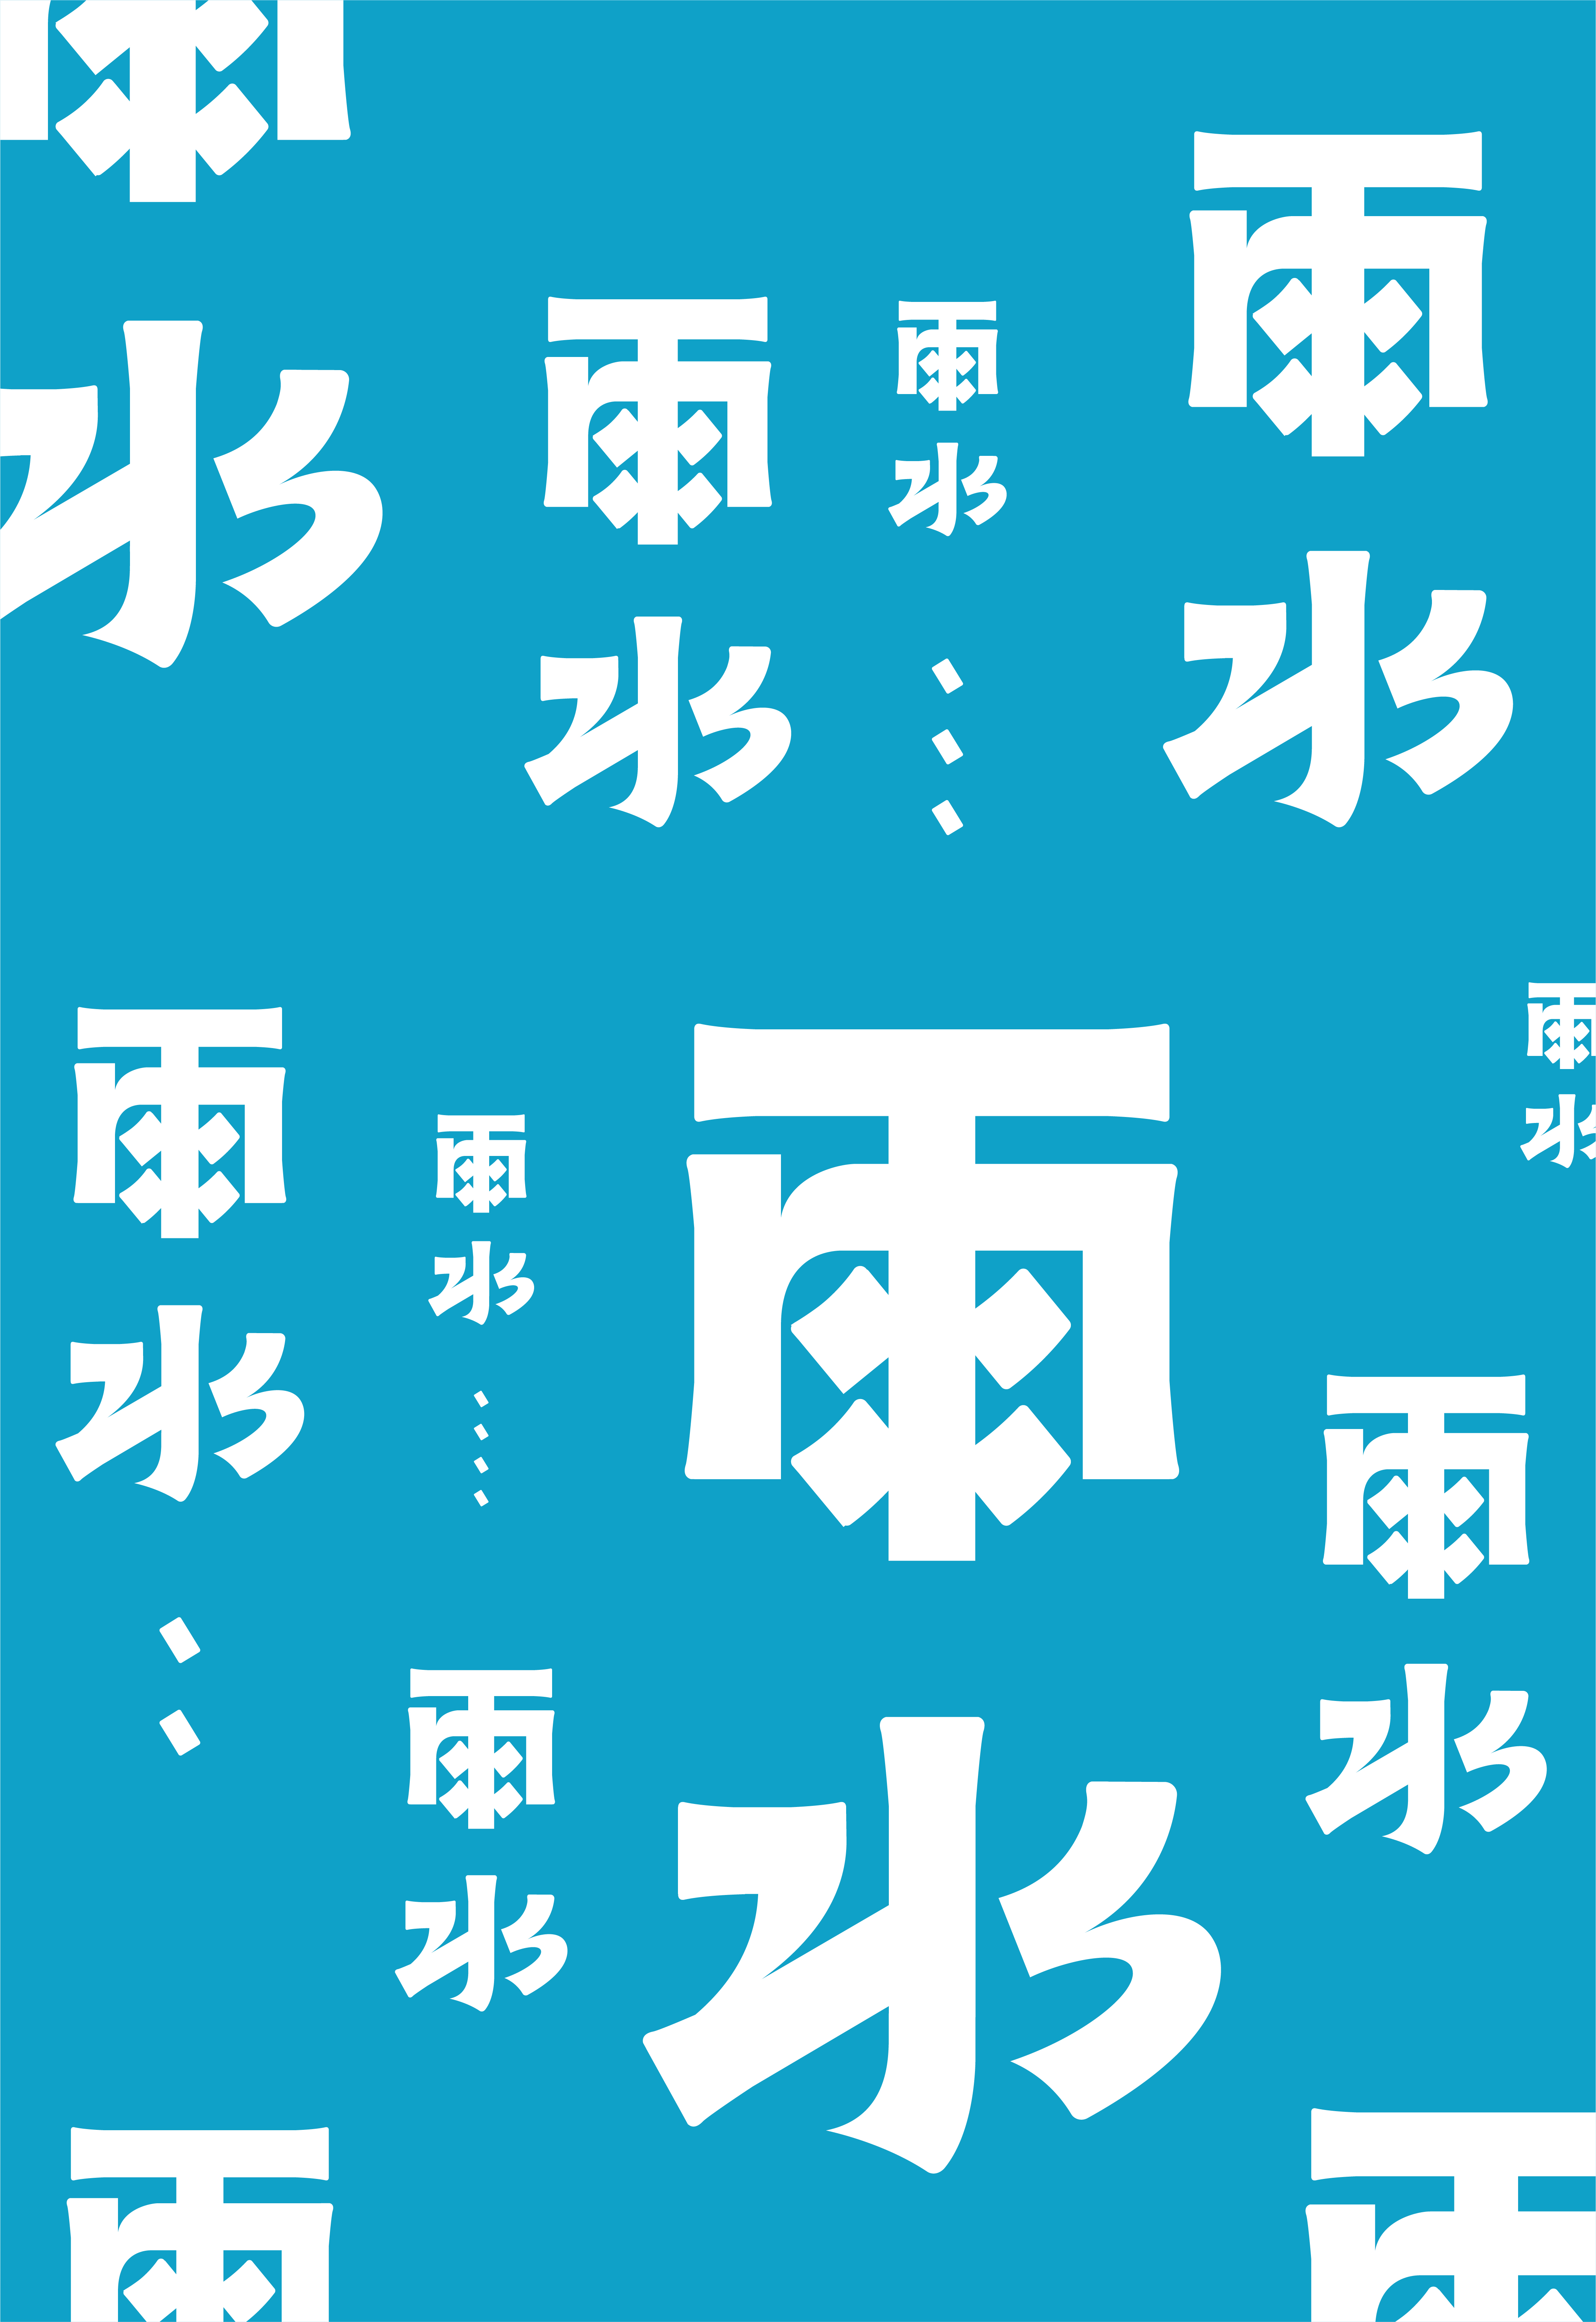 13P Chinese font design collection inspiration #.382